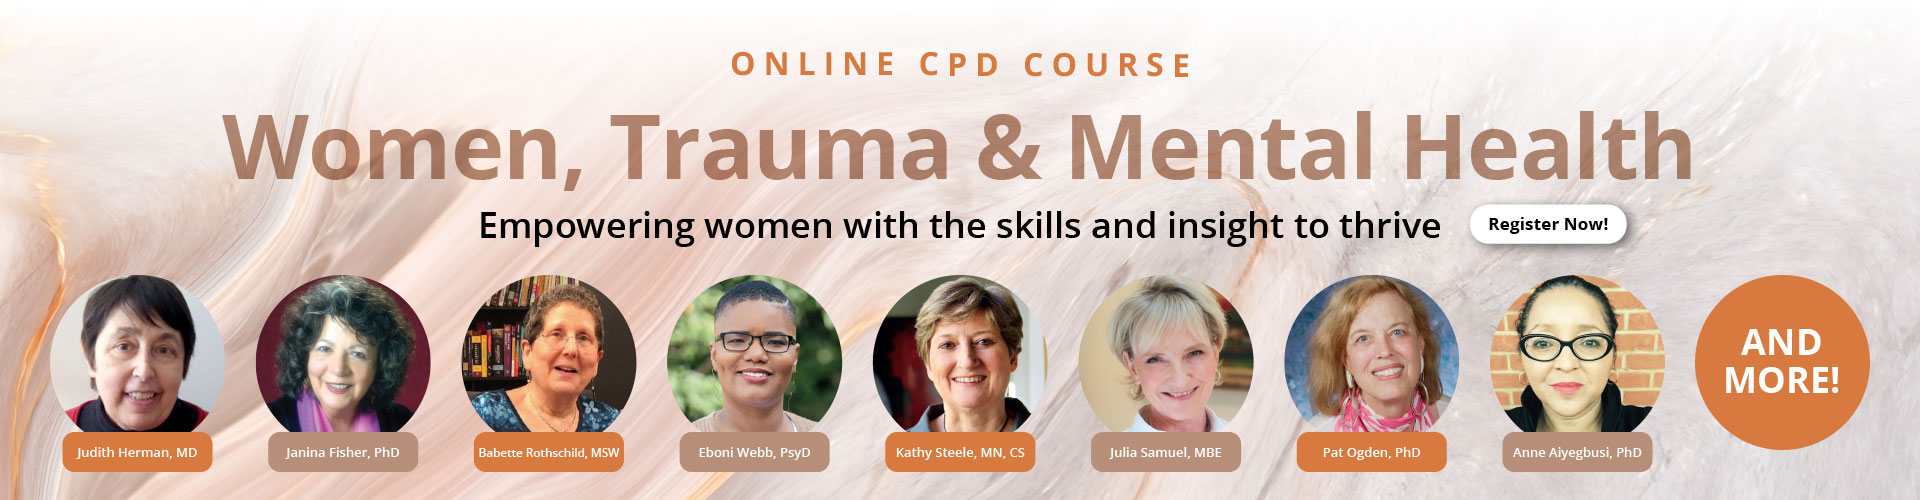 Women, Trauma and Mental Health Master Course: Empowering women with the skills and insight to thrive